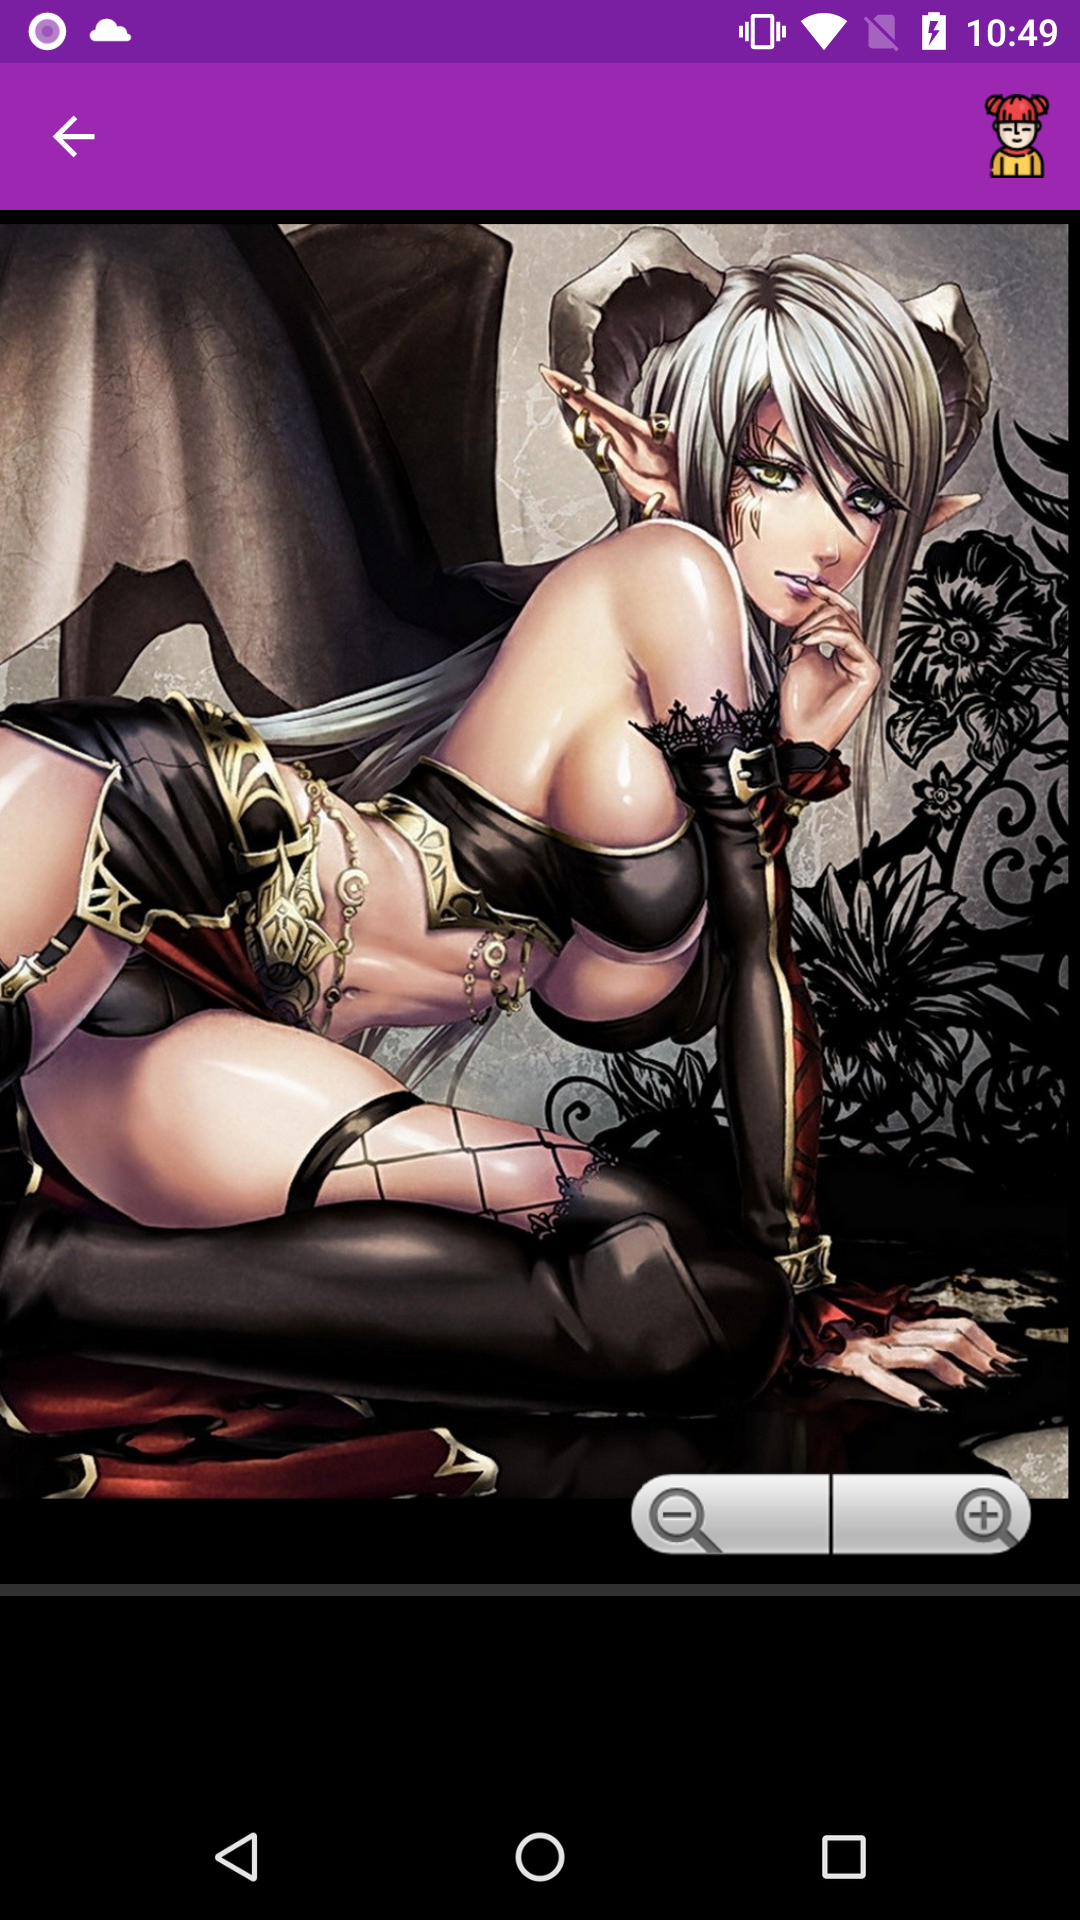 Fantasy Girls wallpapers wallpapers,backgrounds,image,app,girls,android,sexy,henatai,gallery,hentai,fantasy,pic,picture,collections,pics,adult,photo,apps,apk,free,anime